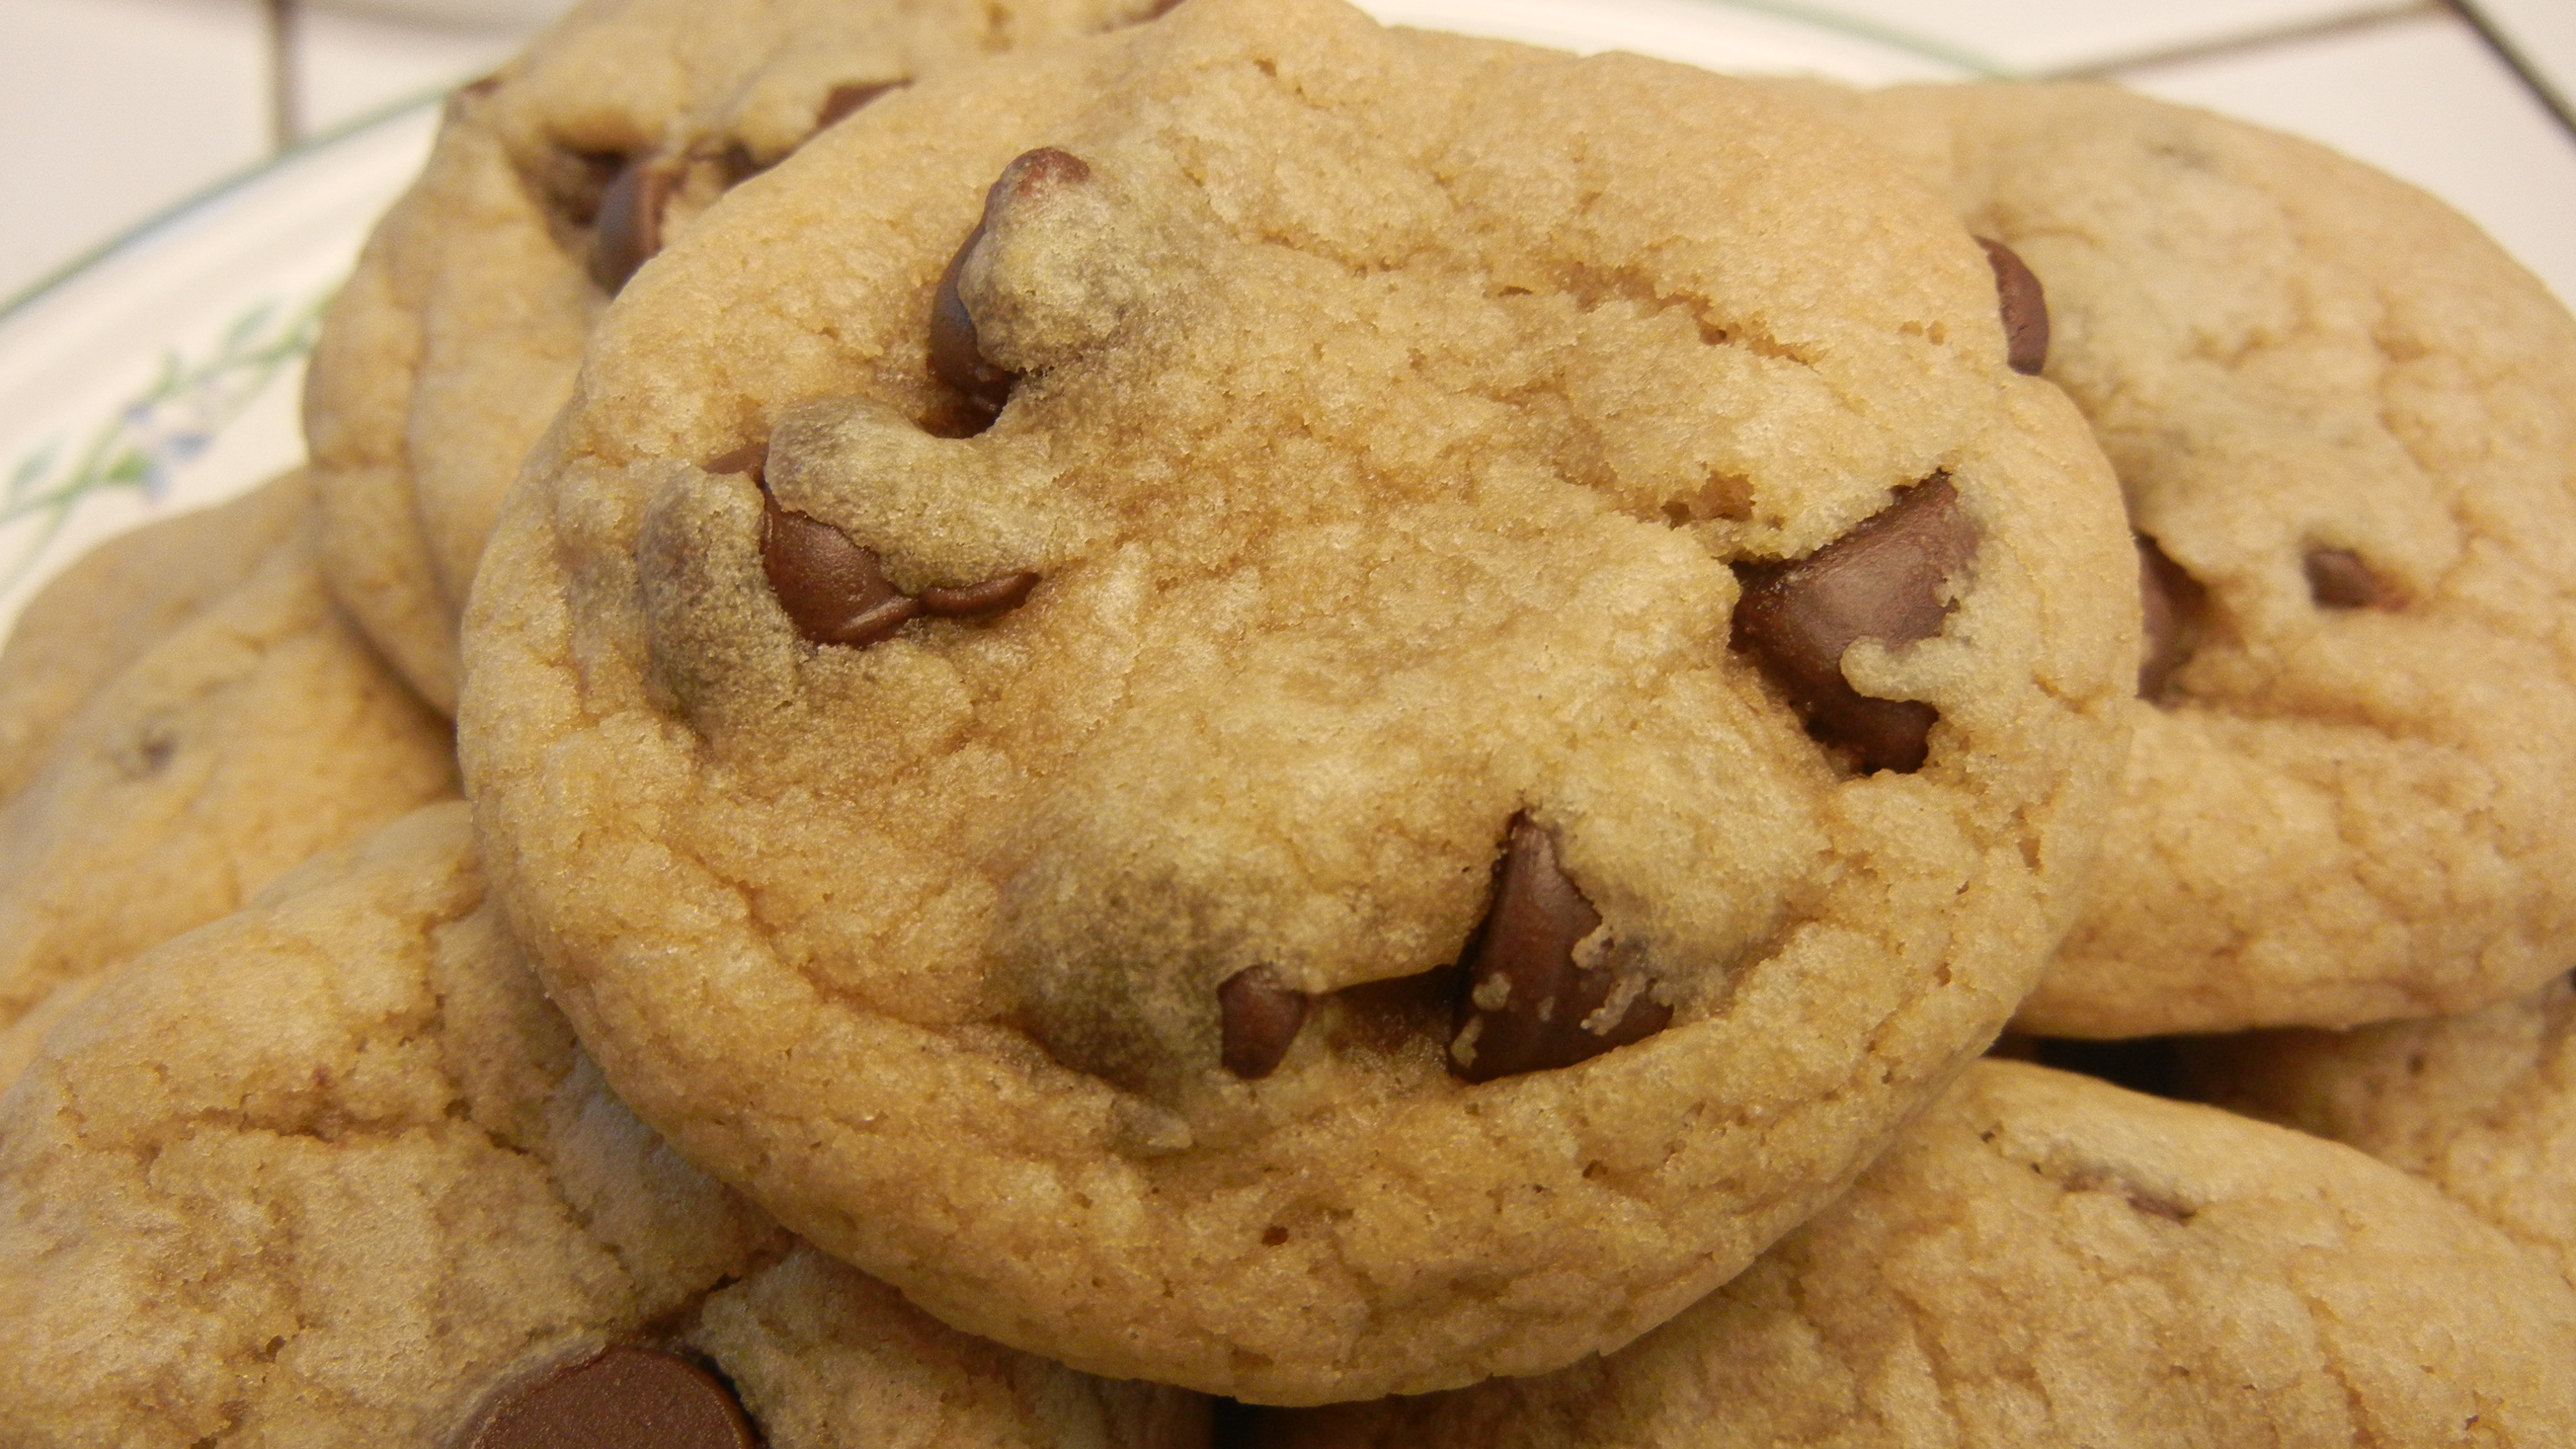 Allrecipes Chocolate Chip Cookies 20 Best Fluffy Chocolate Chip Cookies Allrecipes Of Allrecipes Chocolate Chip Cookies 